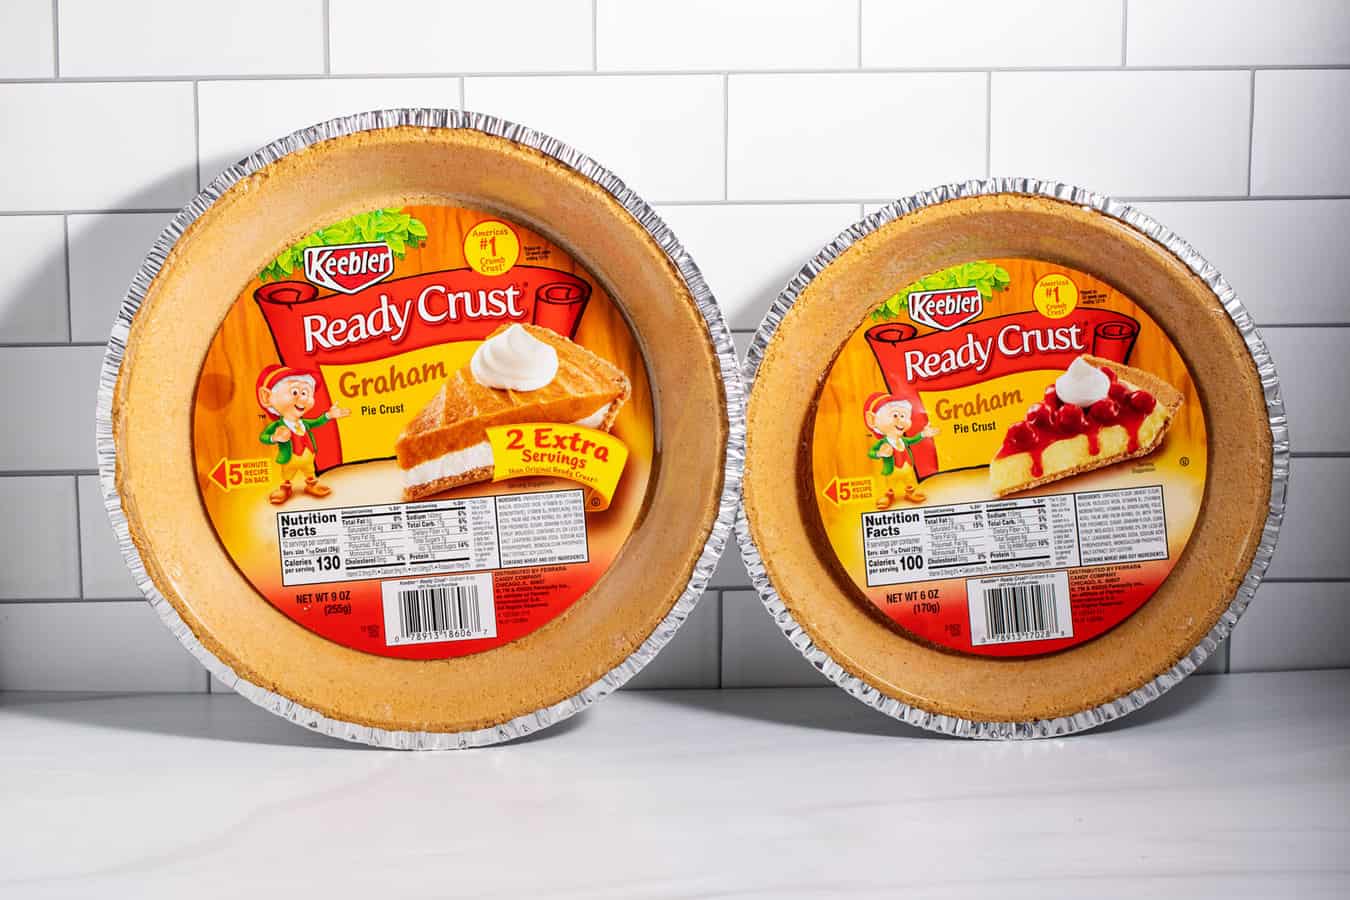 9 oz and 6 oz Keebler Ready crusts.